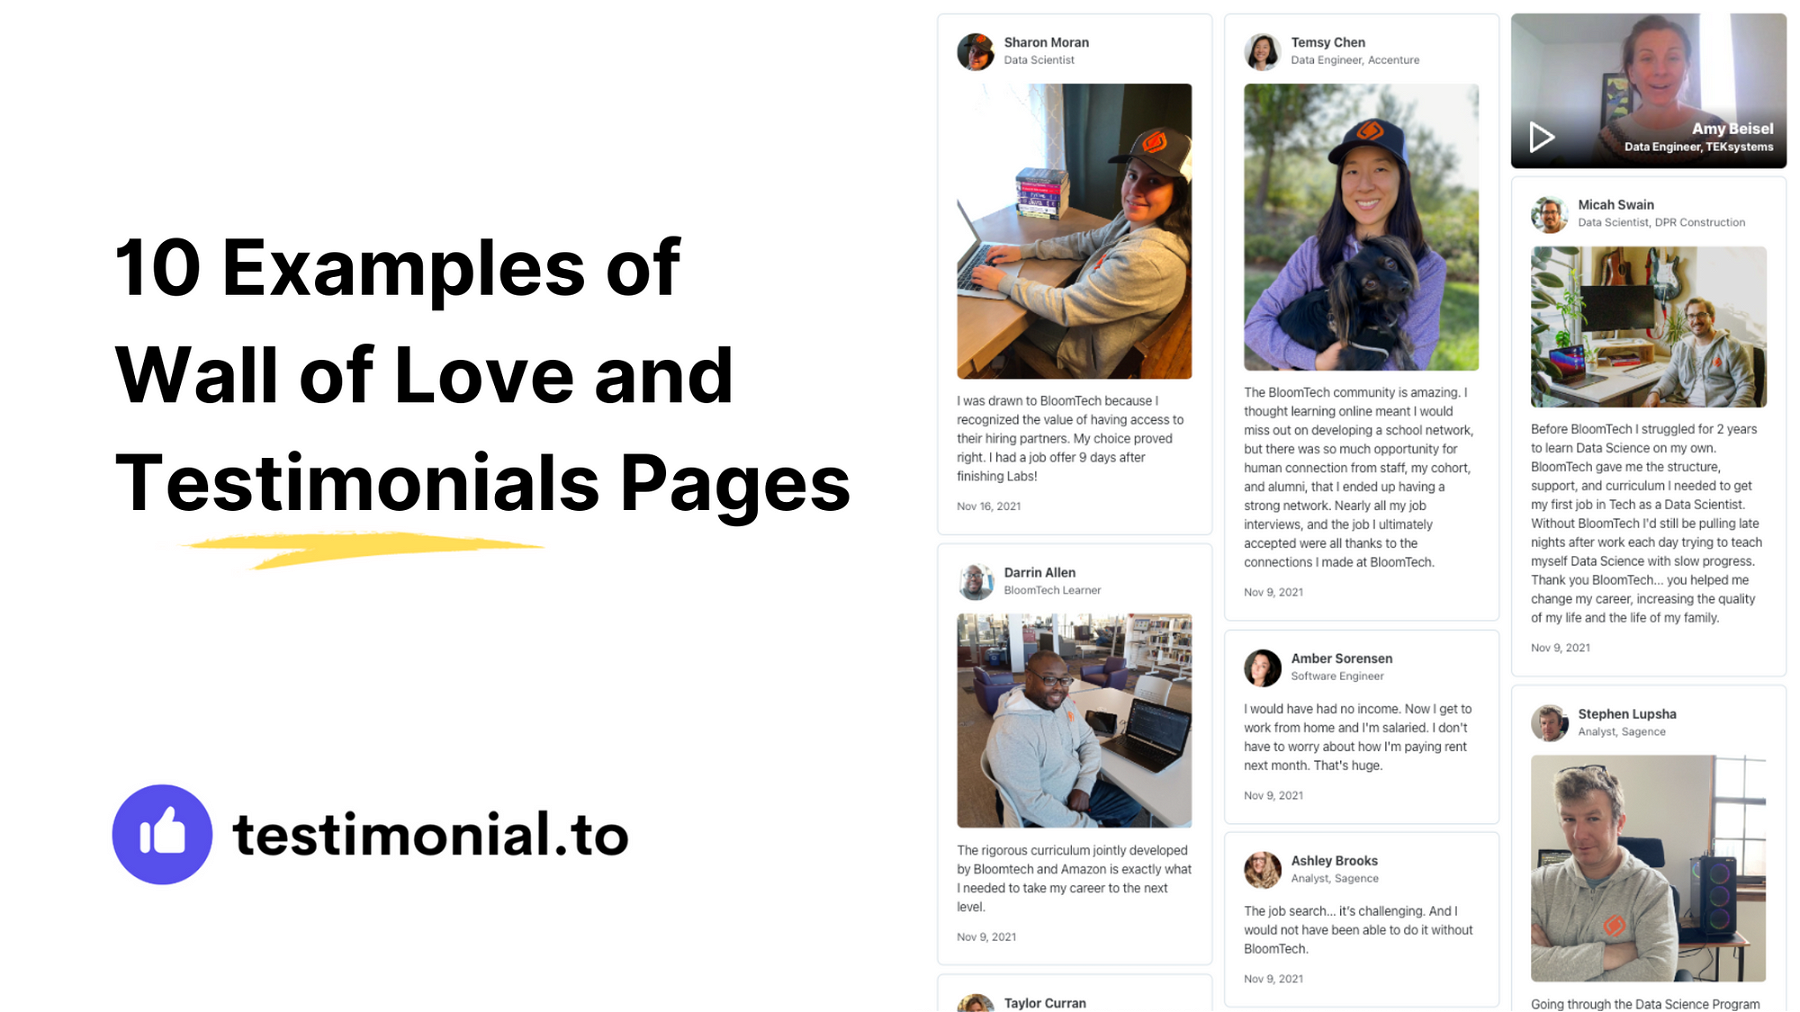 10 Examples of Wall of Love and Testimonial Pages